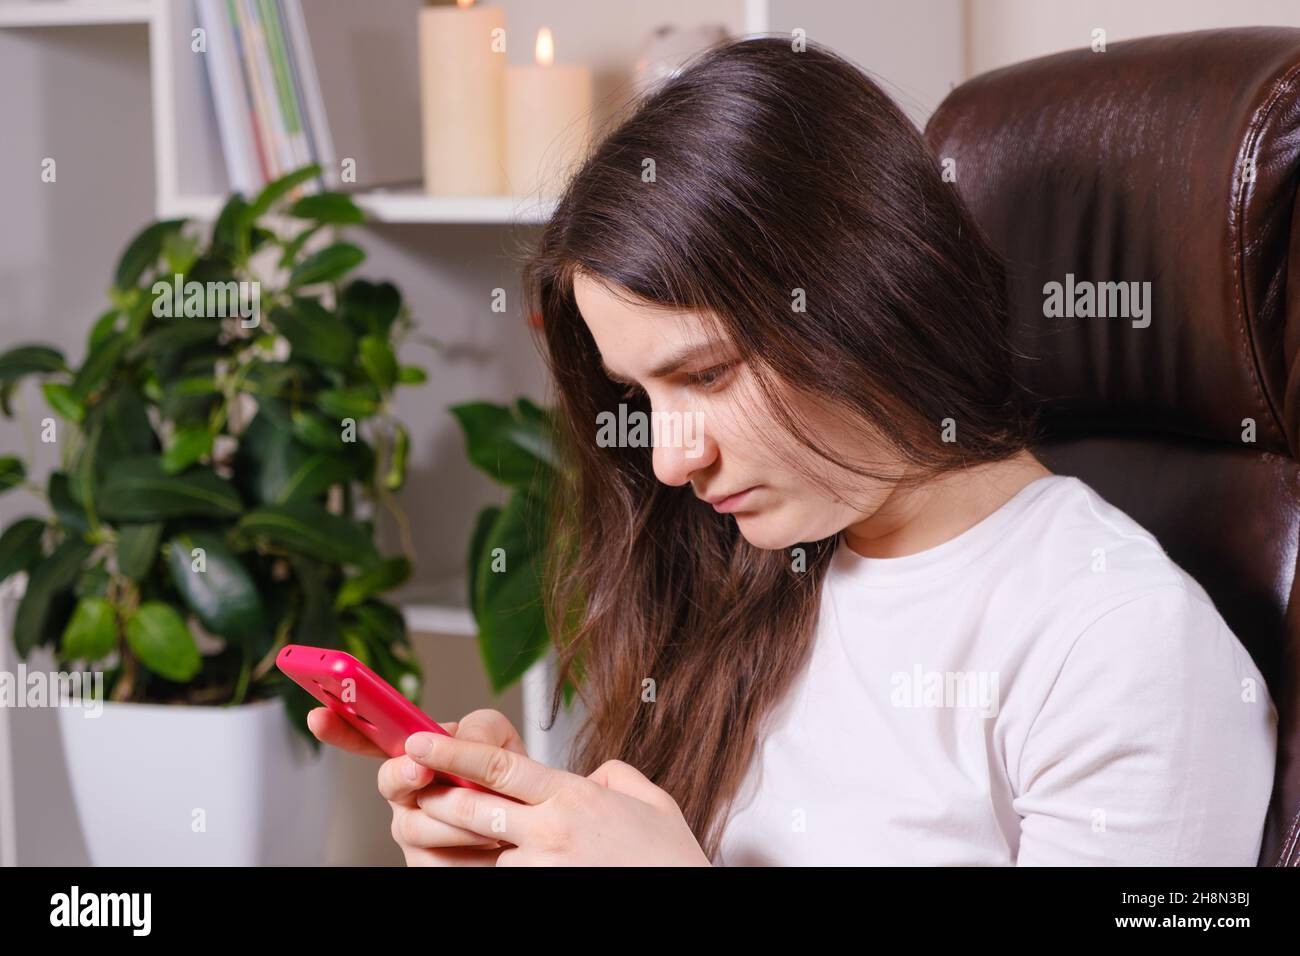 The woman looks at the screen of the phone, tilting her head down, tension of the muscles of the neck and poor posture. Stock Photo